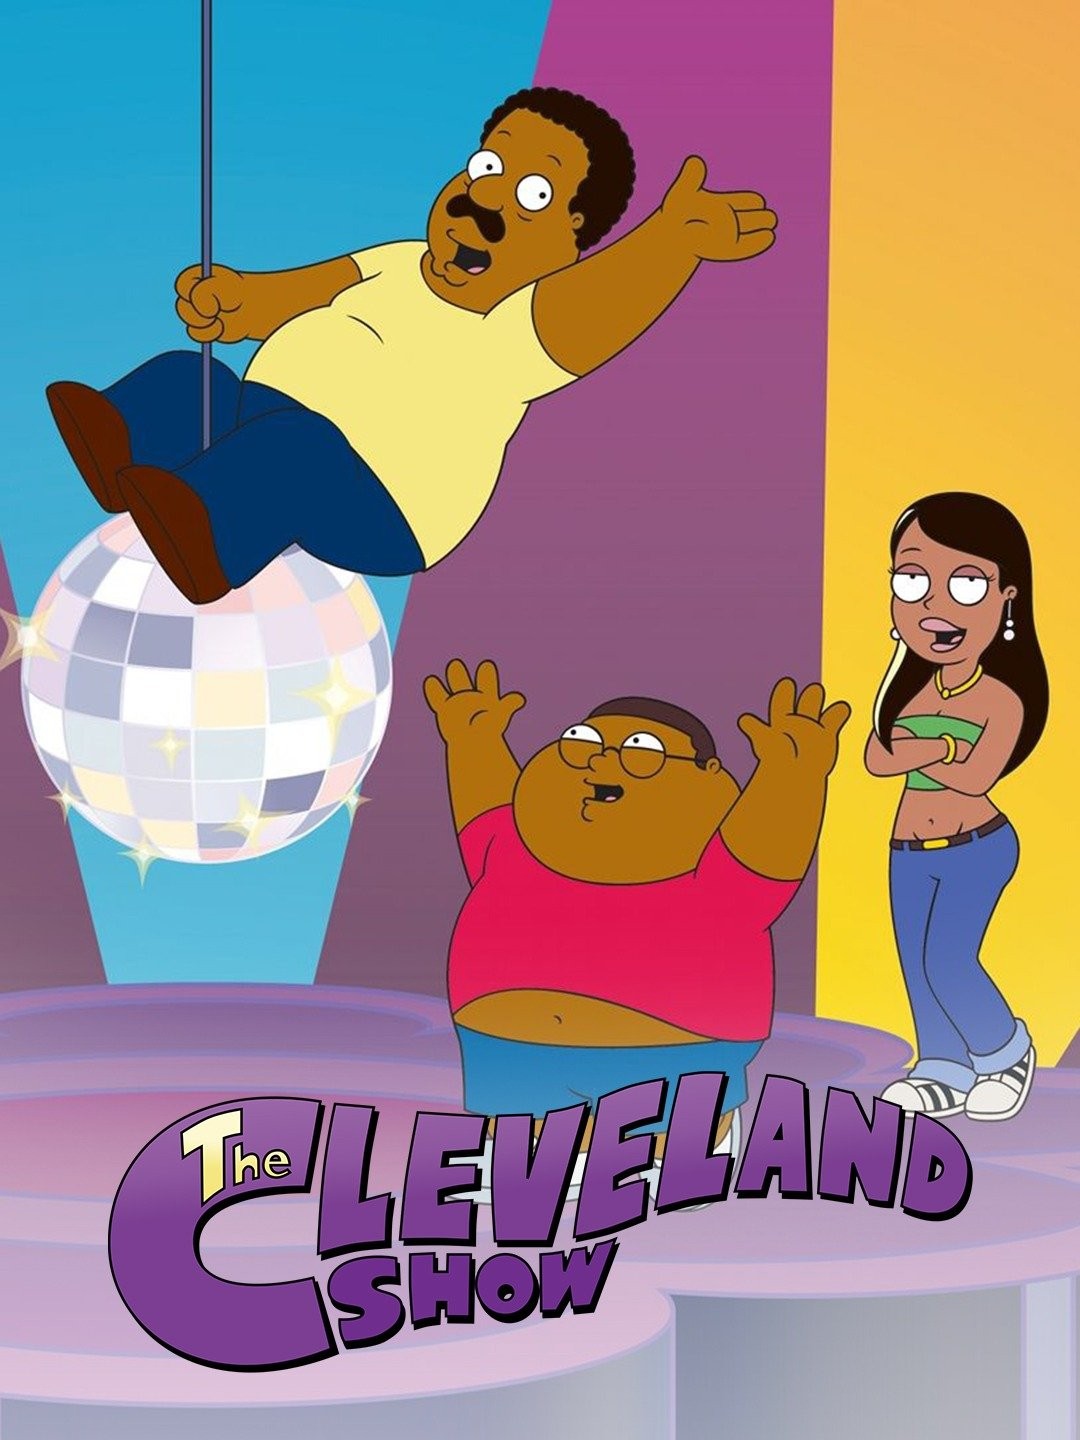 andre javier recommends the cleveland show parody pic